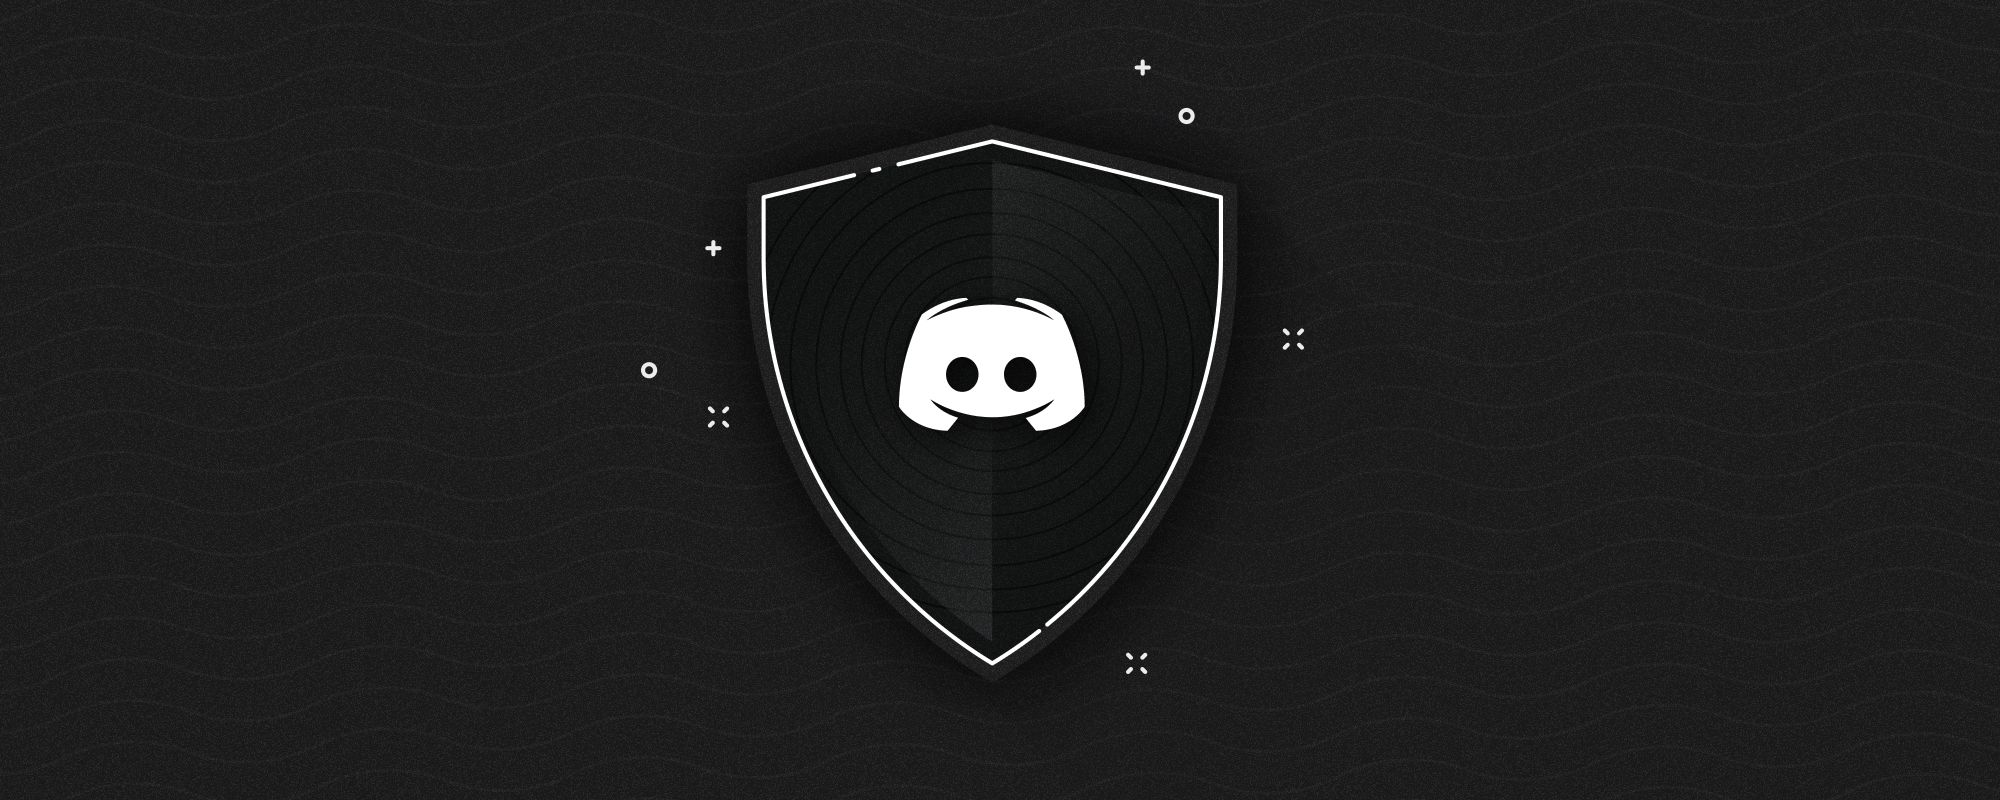 discord_security_shield.png